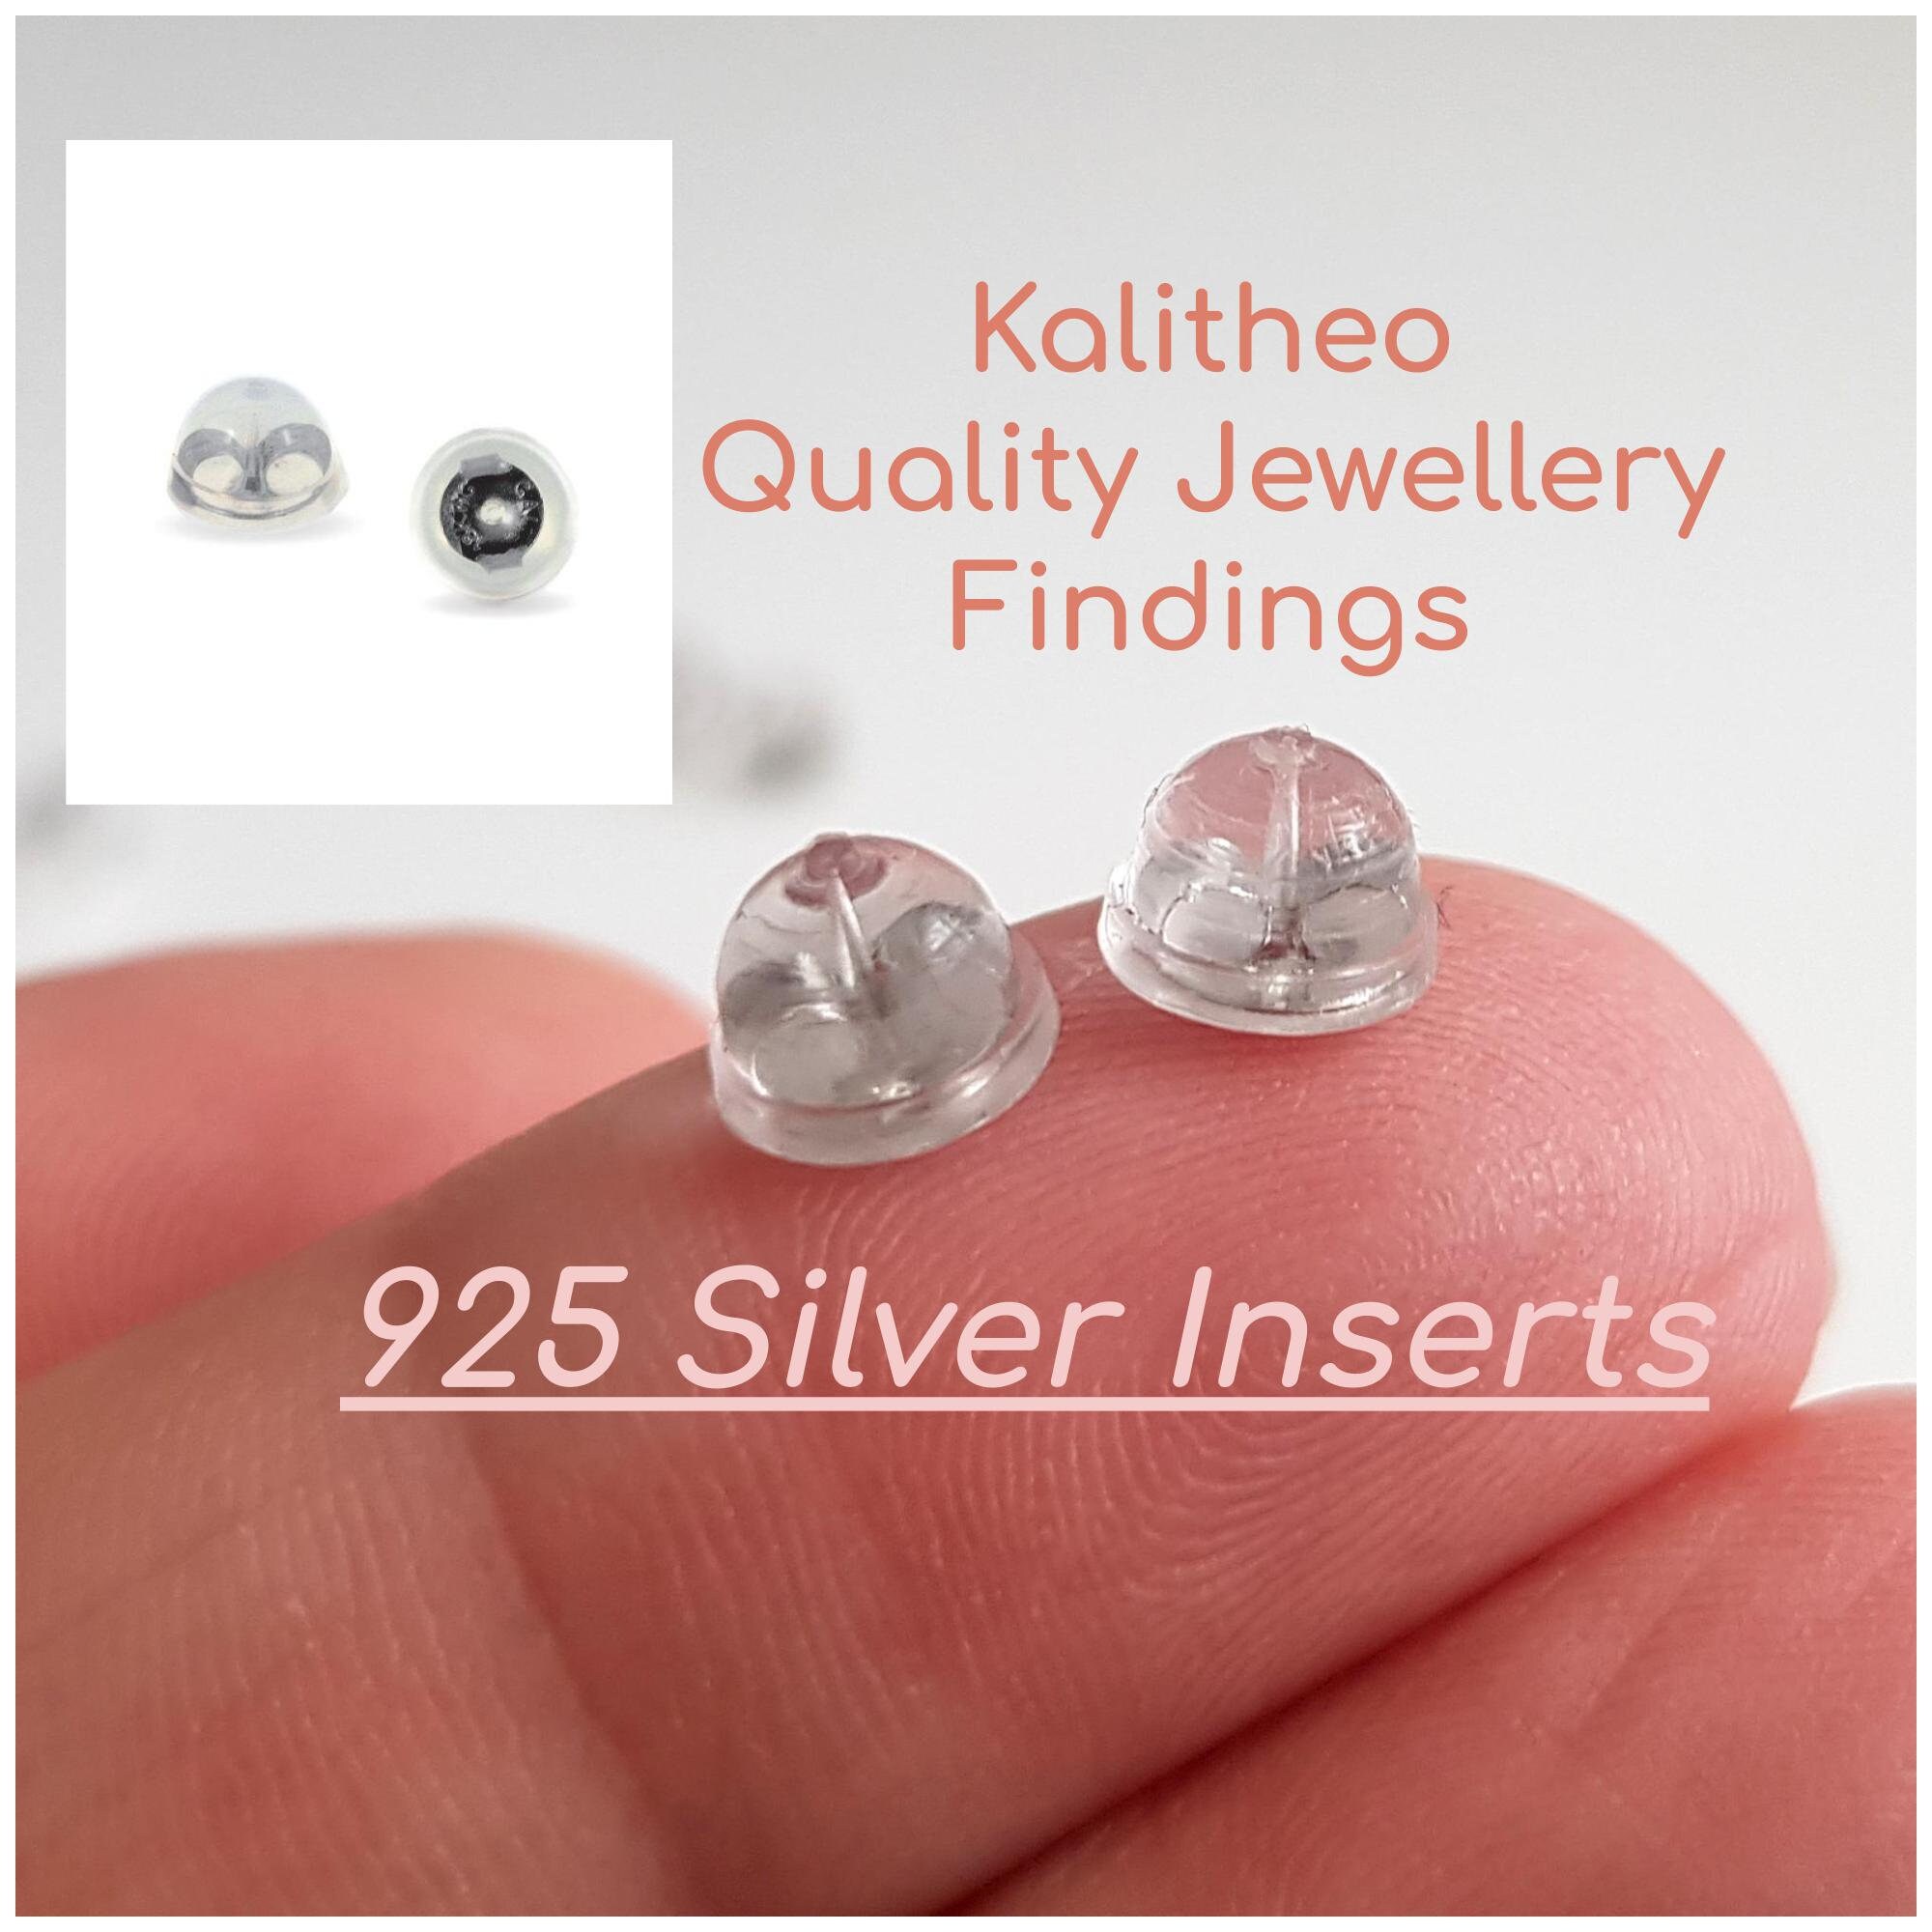 Kids Jewellery Pair 925 Silver Dome Silicone Grip Earring Backs Safety  Earring Backs for Kids & Babies Aus…